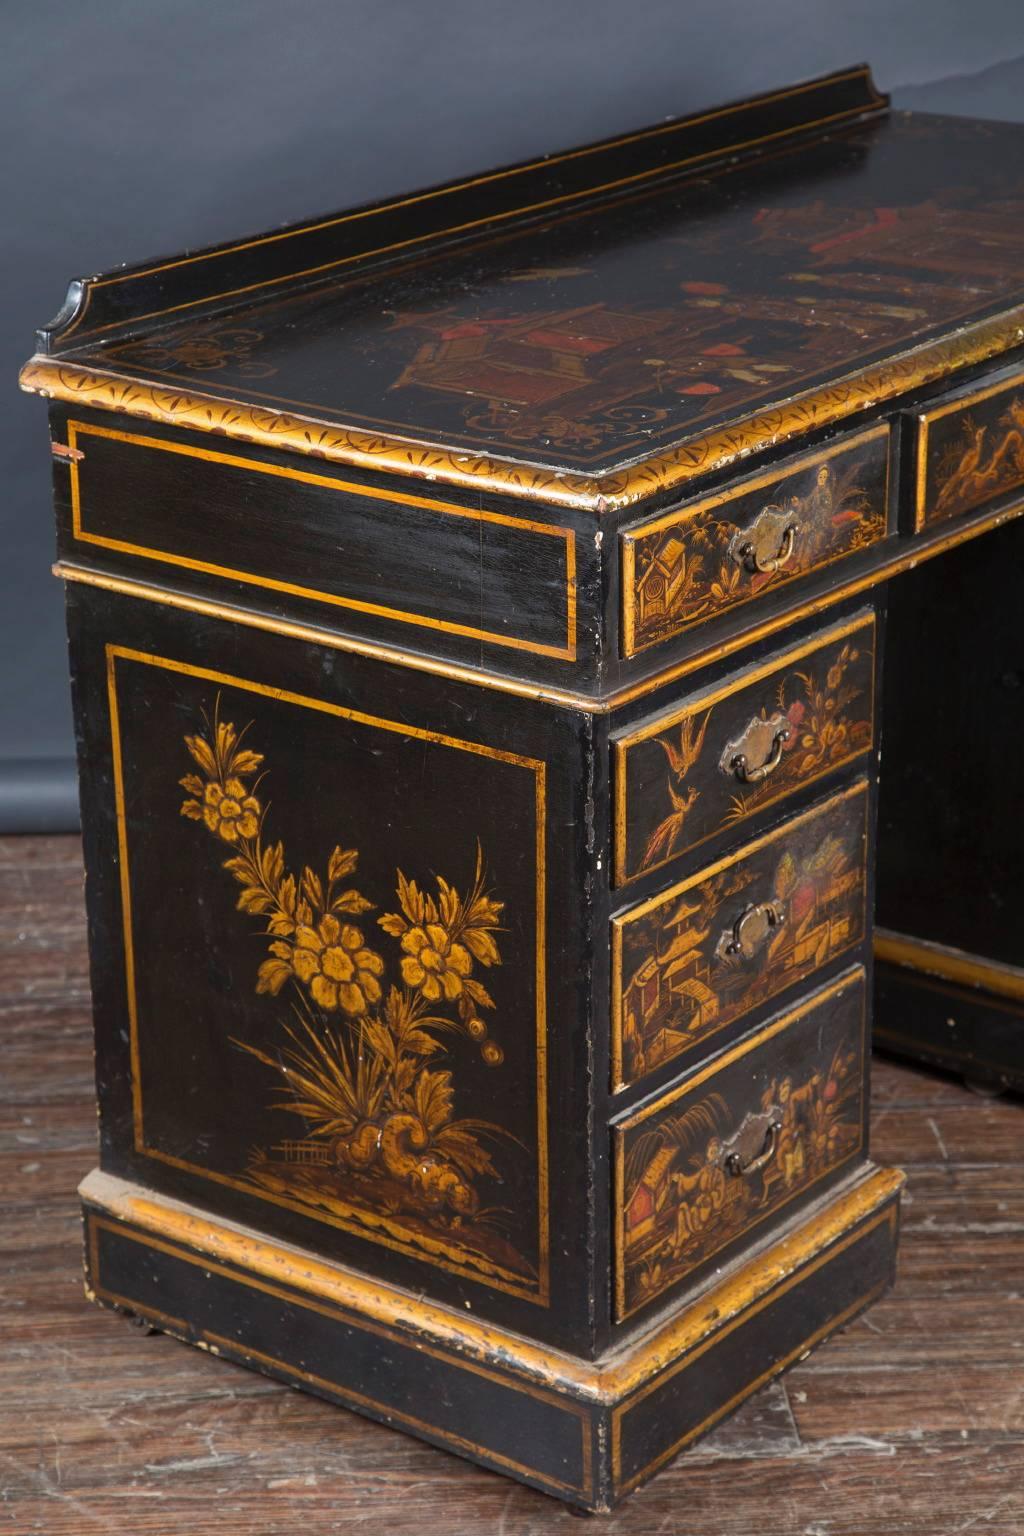 This French, 19th century Chinoiserie black lacquer and gilded kneehole desk features an impressive 9 drawer fronts decorated with flora, fauna, pagodas, and classic Japanese scene. The French antique piece sports the originl brass drawer pulls, 